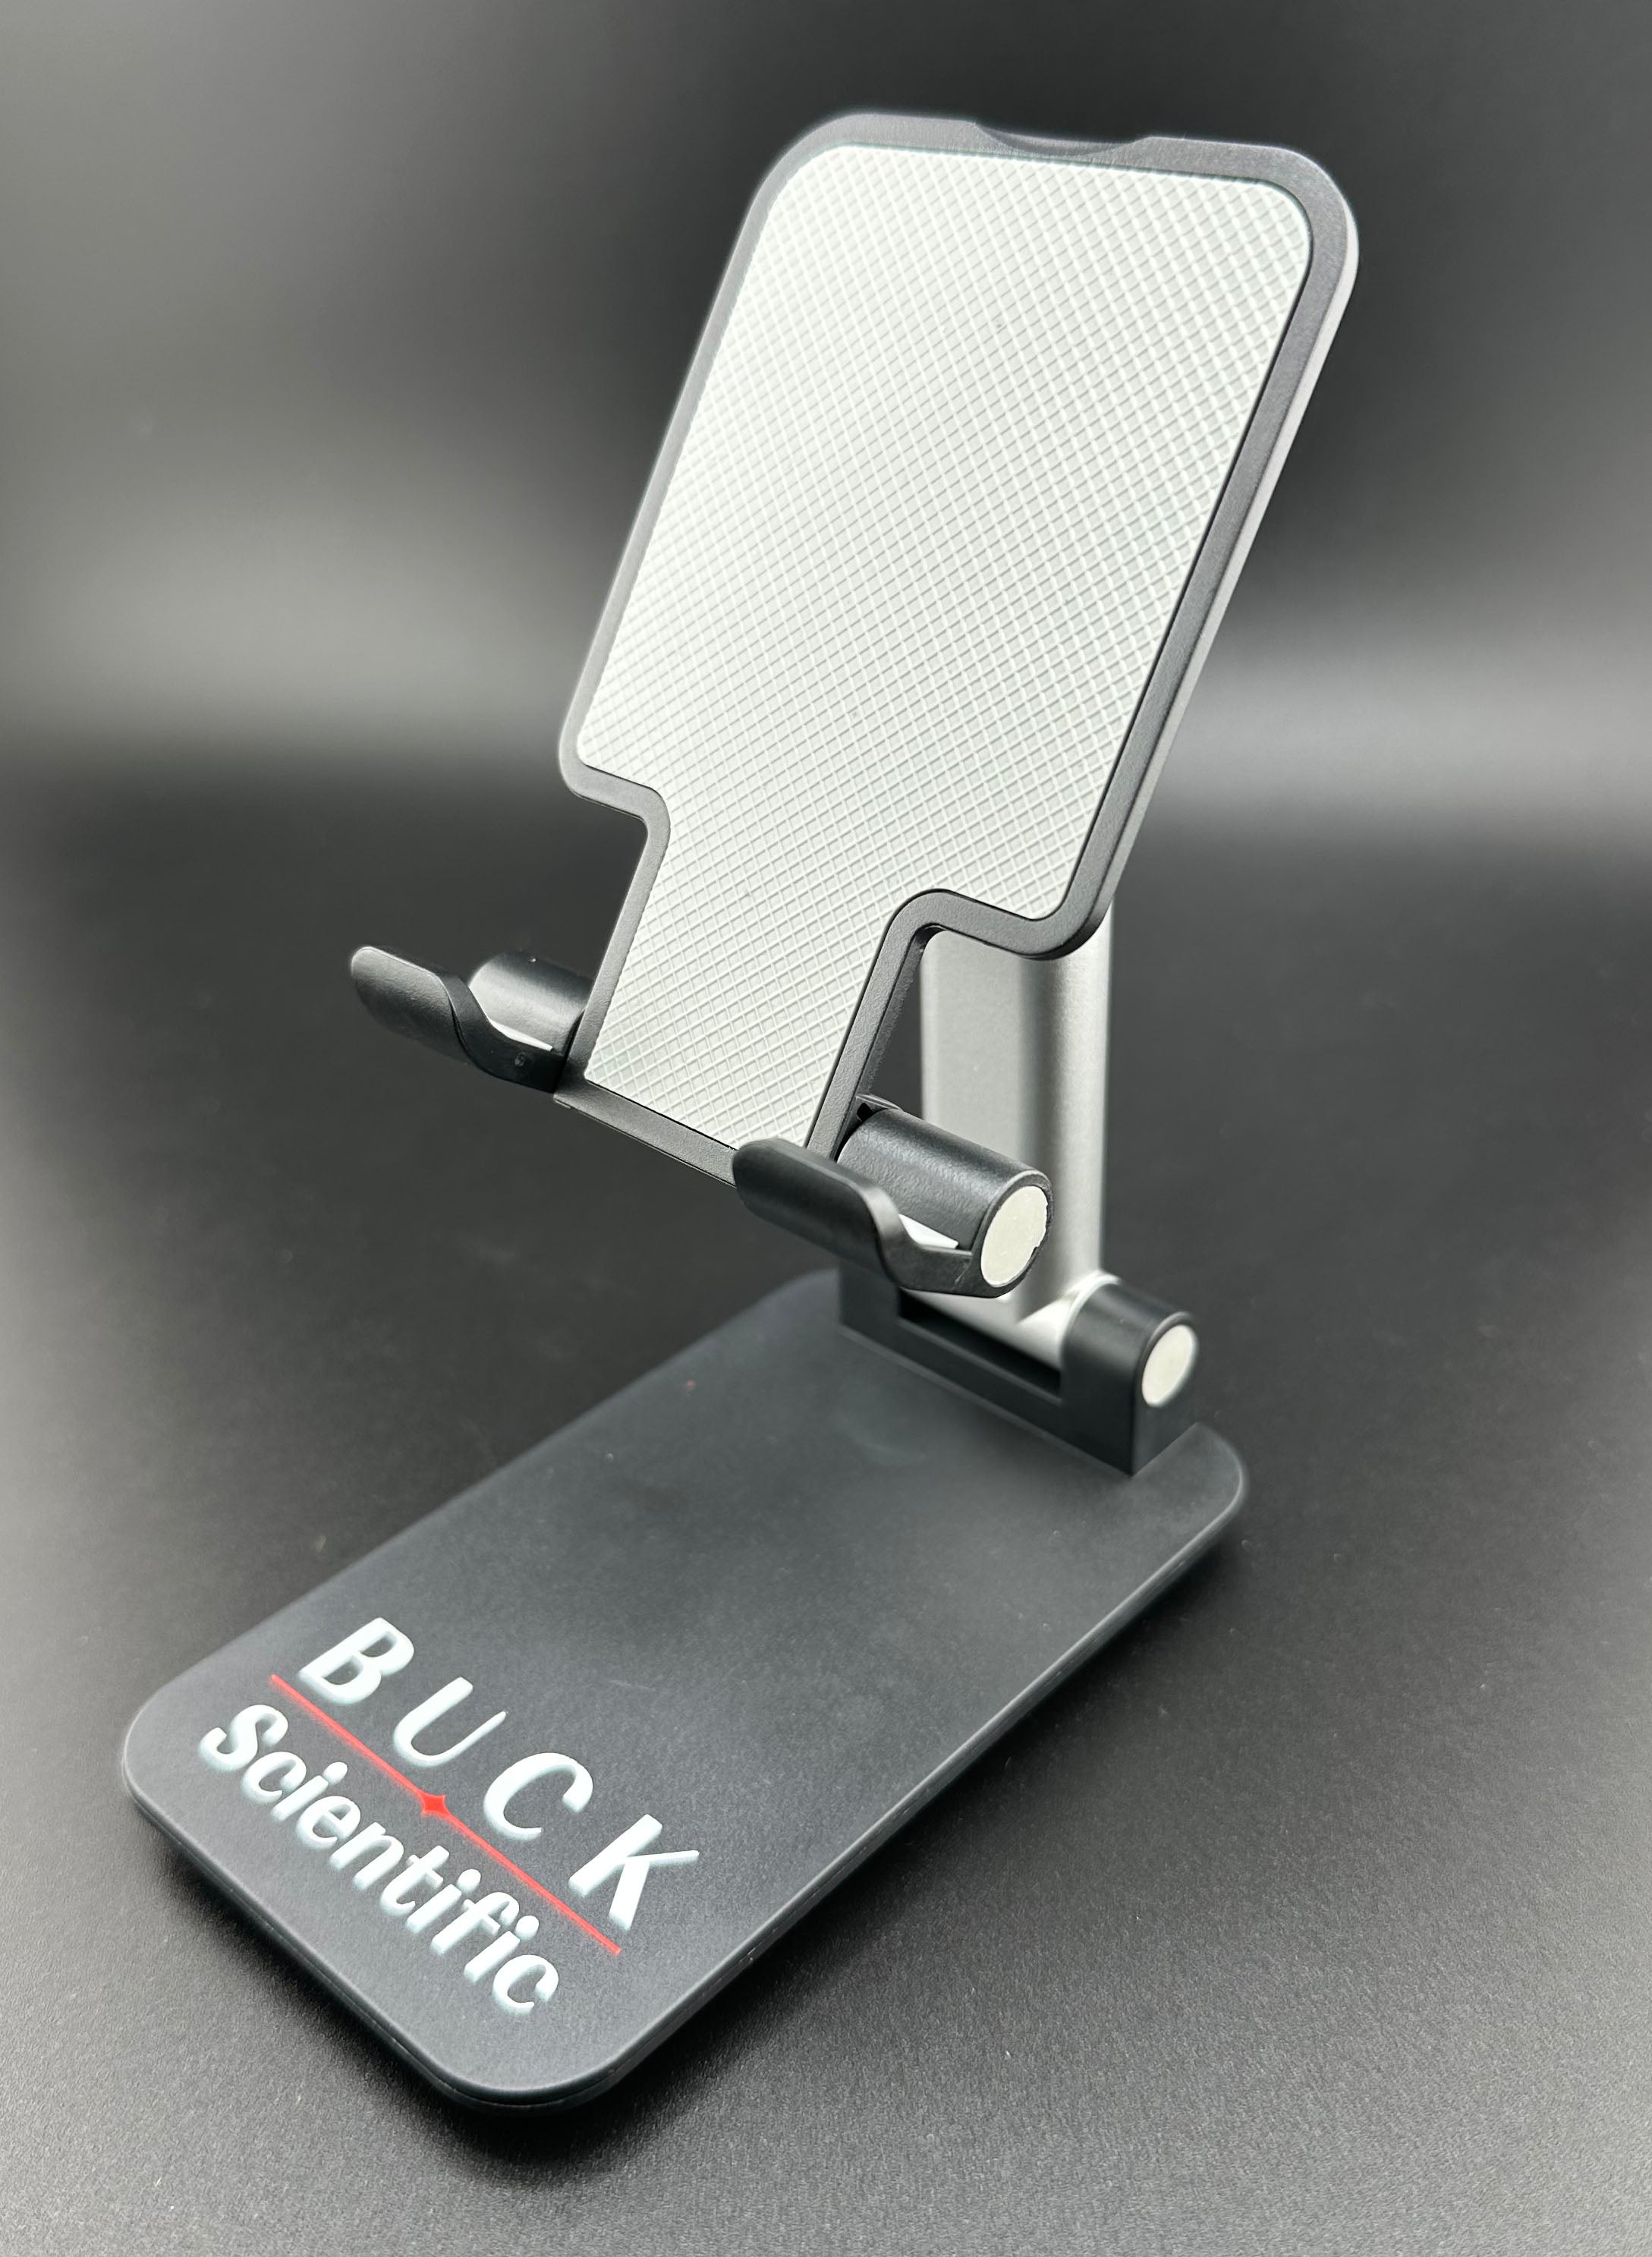 Get a FREE Buck Sci Cell Phone / iPad Holder!